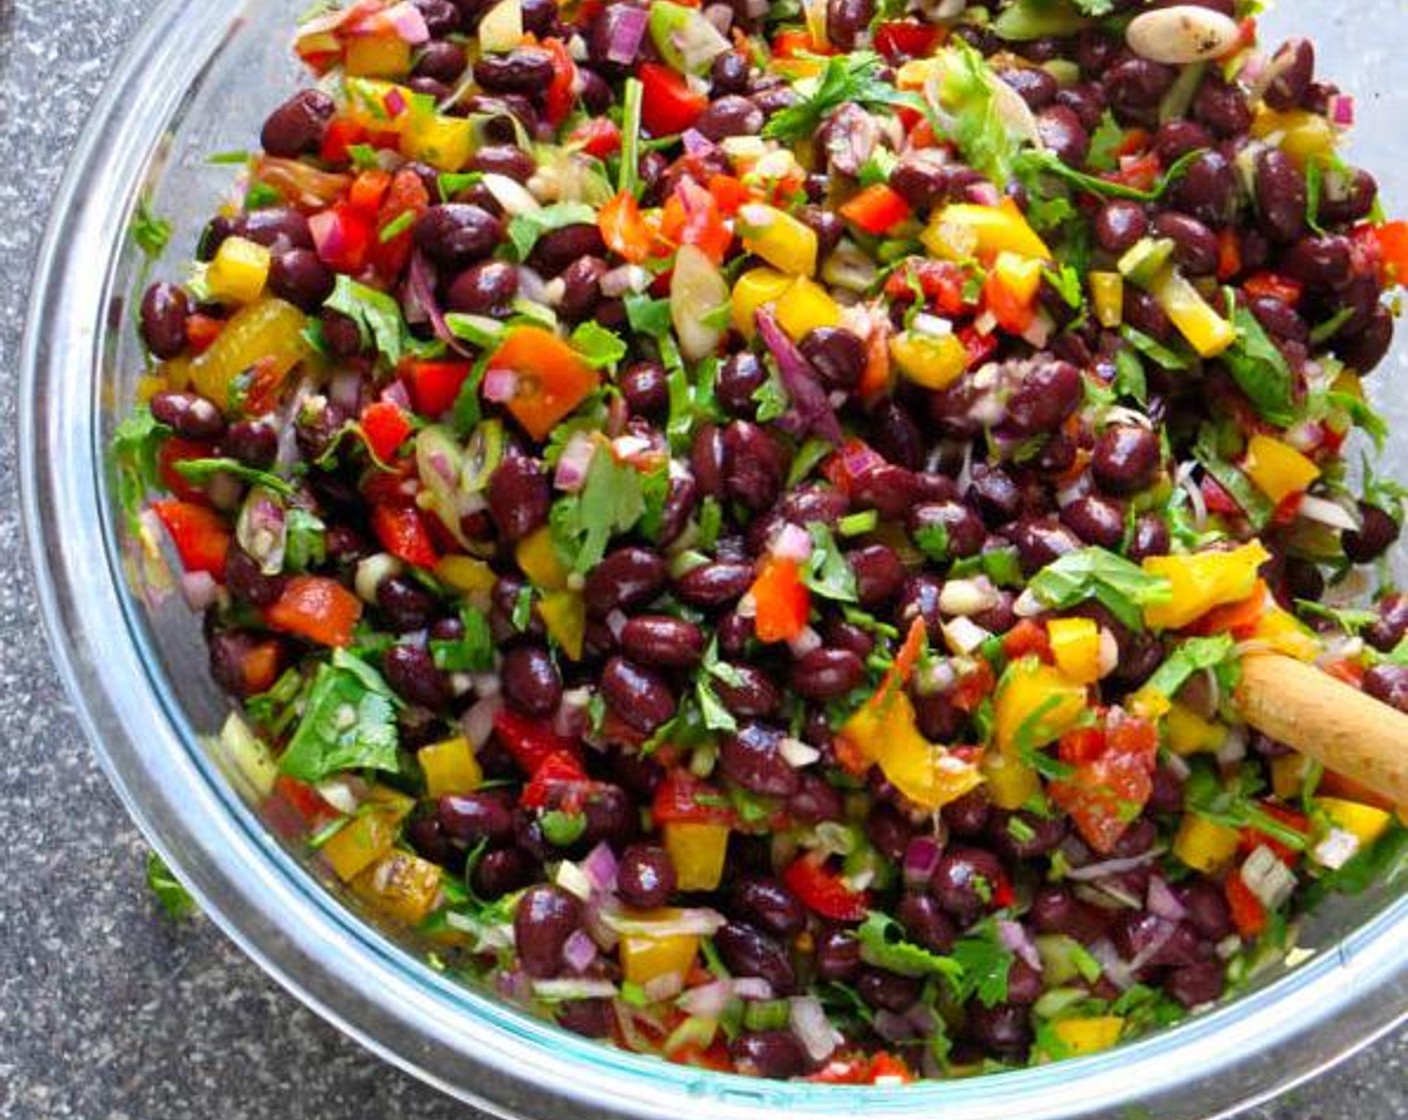 step 1 In a large bowl combine, the Red Bell Pepper (1/2), Yellow Bell Pepper (1/2), Jalapeño Pepper (1), {@10:}, Canned Black Beans (2 cans), Scallion (1 bunch), Ro-Tel® Diced Tomatoes & Green Chilies (1 can), {@11:}, Red Onion (1/2), Fresh Cilantro (1 cup), Kosher Salt (1/2 tsp), and Ground Black Pepper (1/4 tsp). Toss to combine.